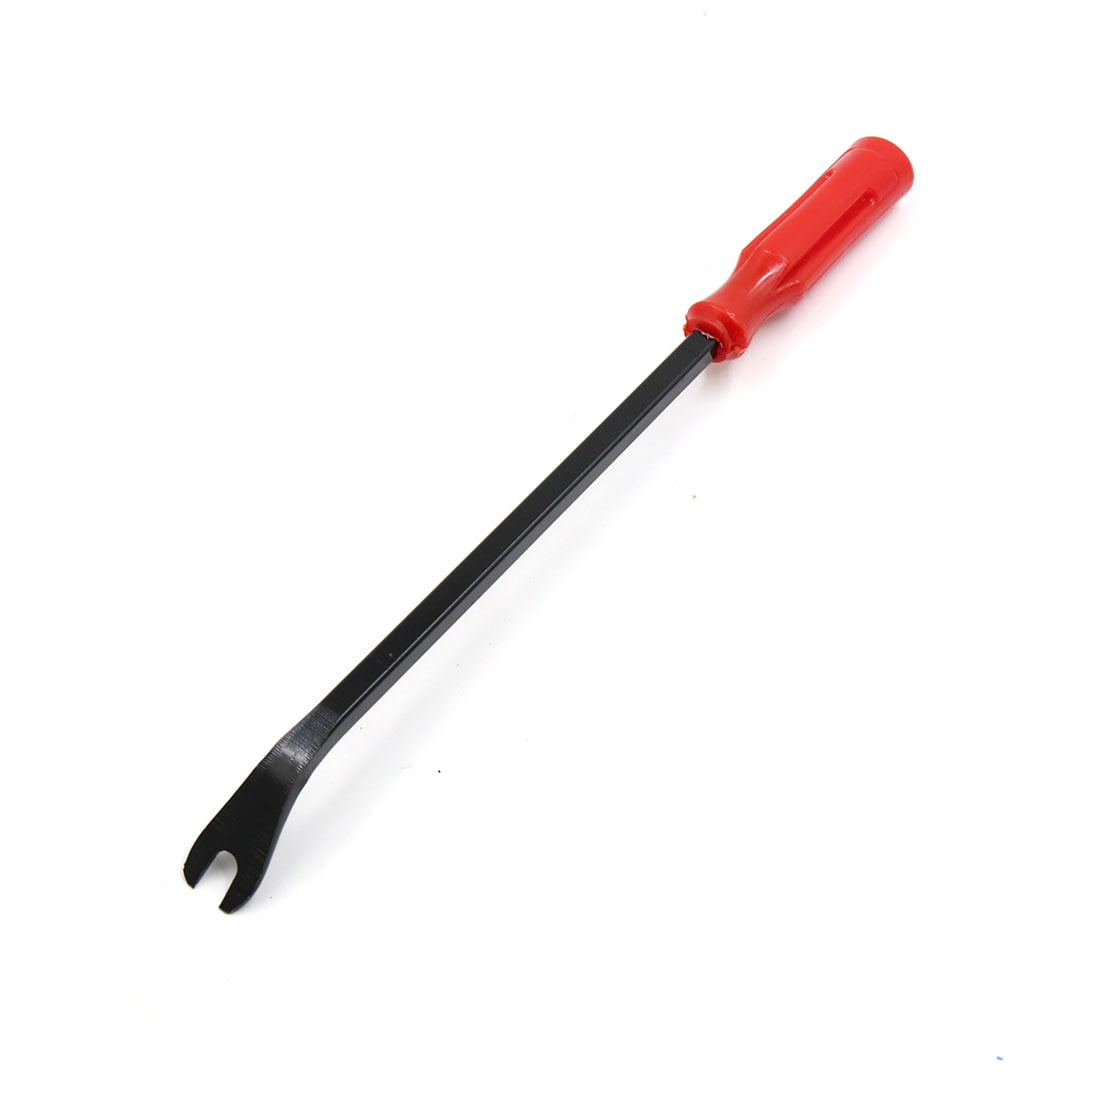 Red Handle Car Vehicle Door Panel Body Retainer Clip Remover Upholstery Pry Tool 